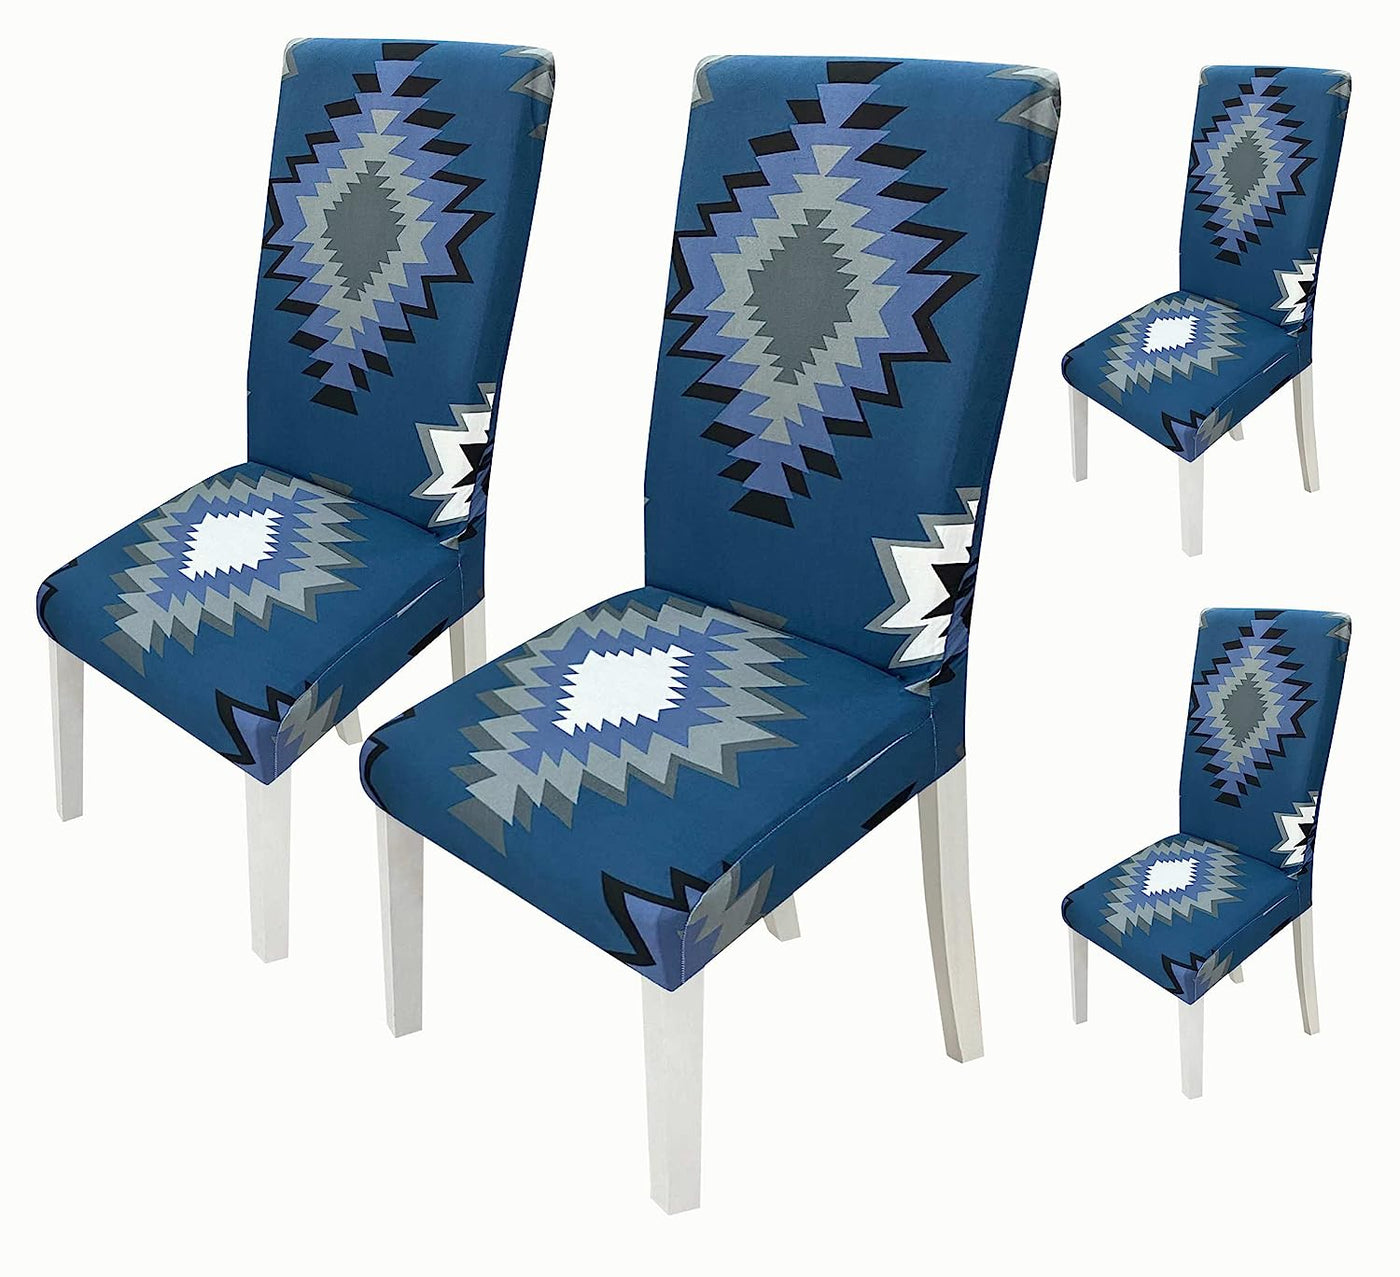 Printed Chair Cover -(Blue Current)